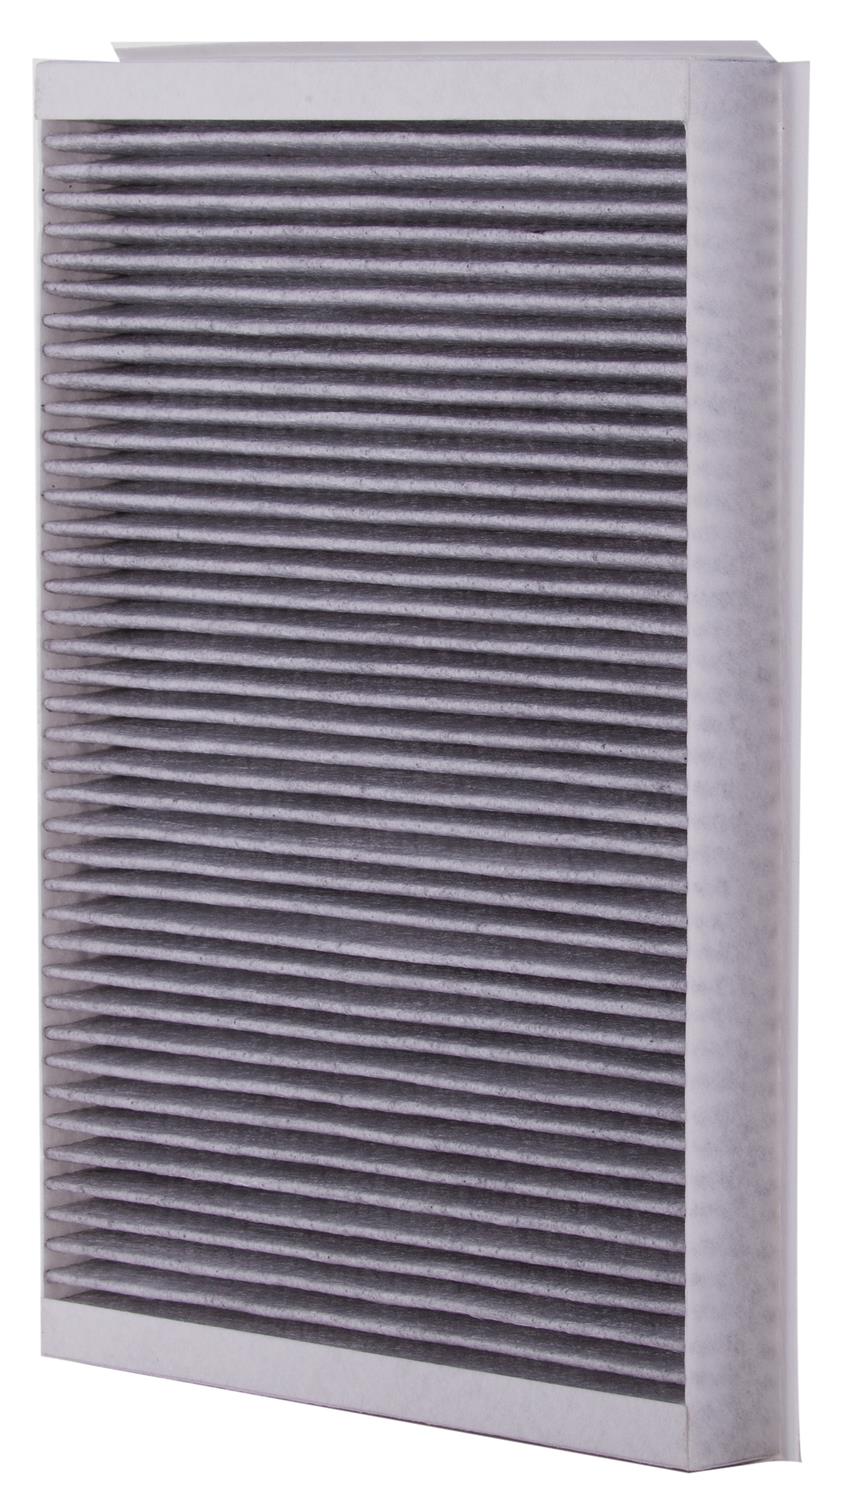 PUREFLOW 2015 Freightliner Sprinter 2500 Cabin Air Filter with Antibacterial Technology, PC9366X